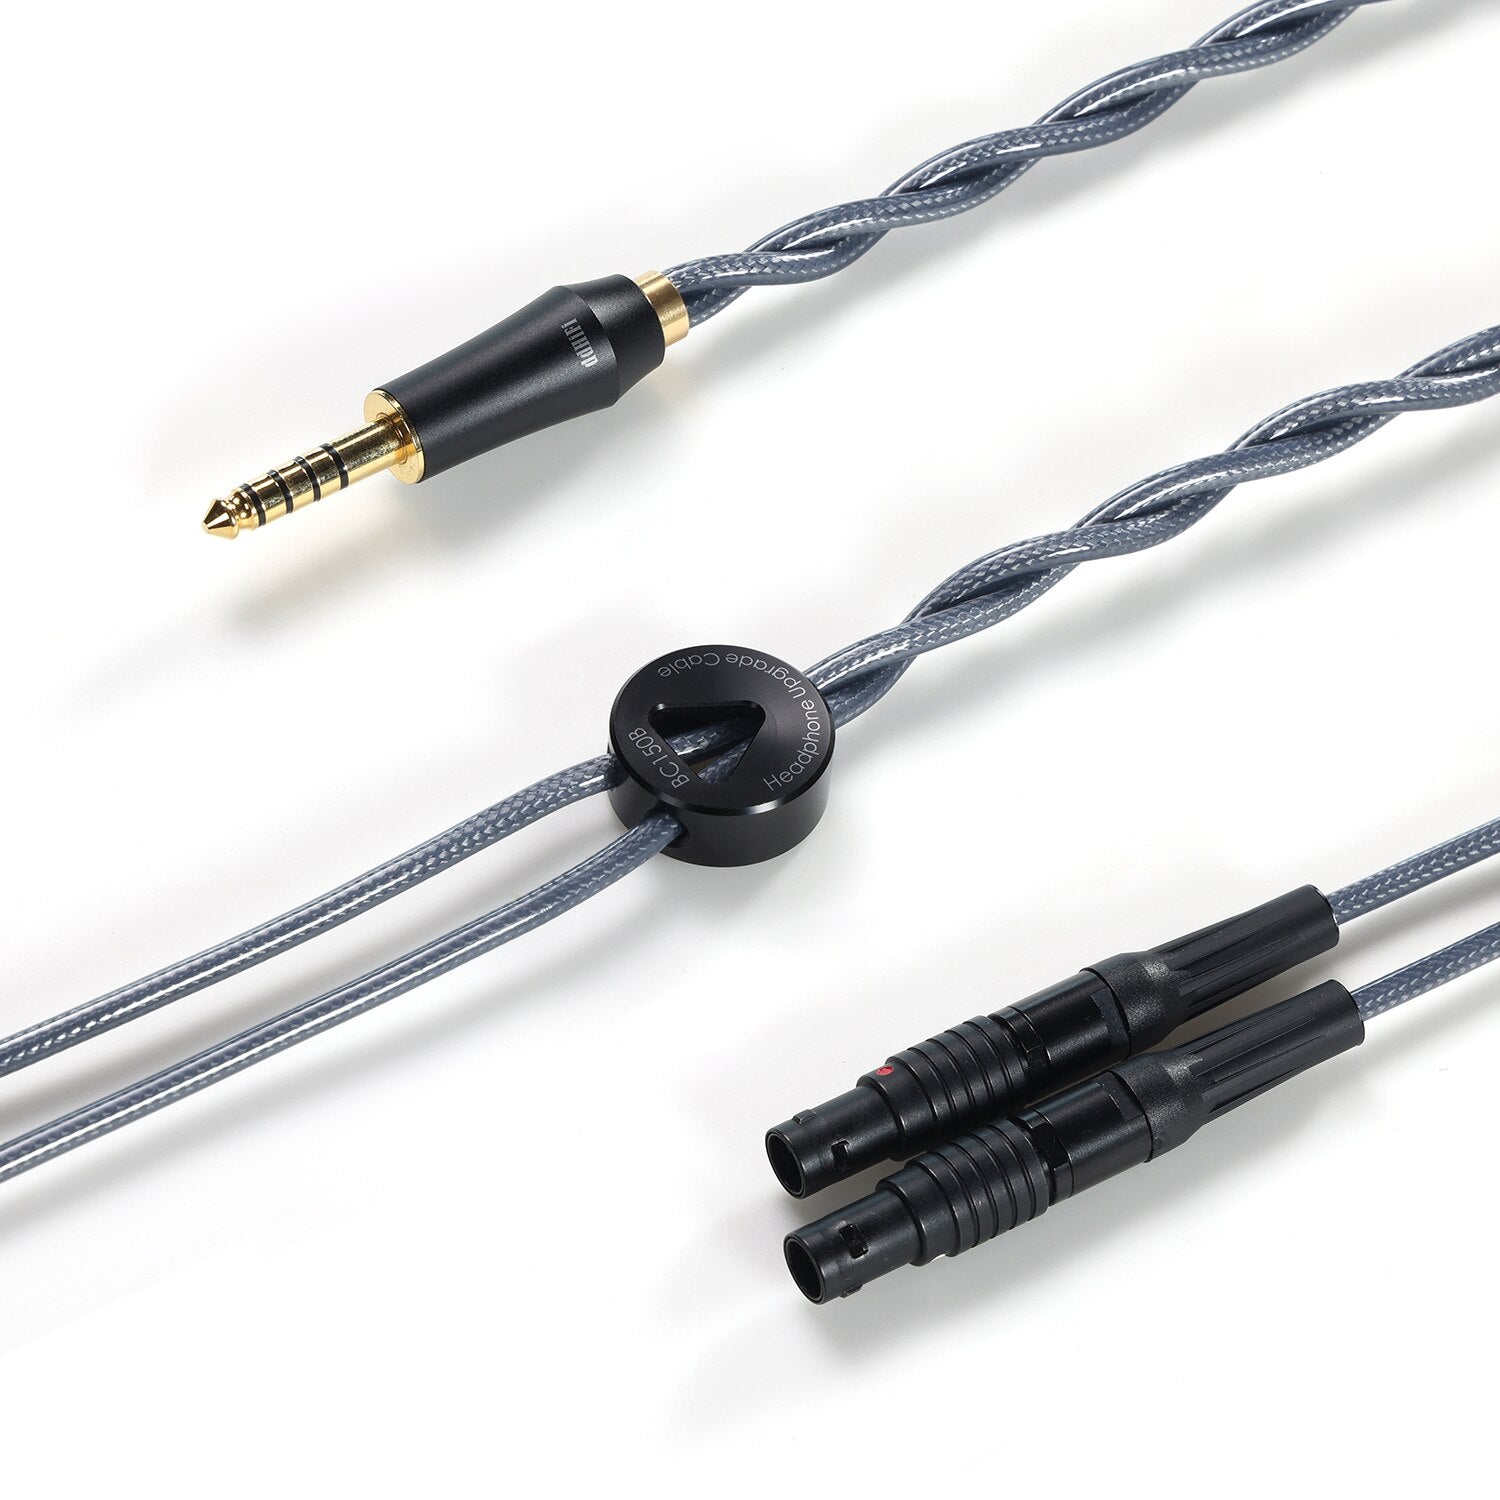 ddHiFi BC150B Double Shielded Earphone Upgrade Cable - The HiFi Cat